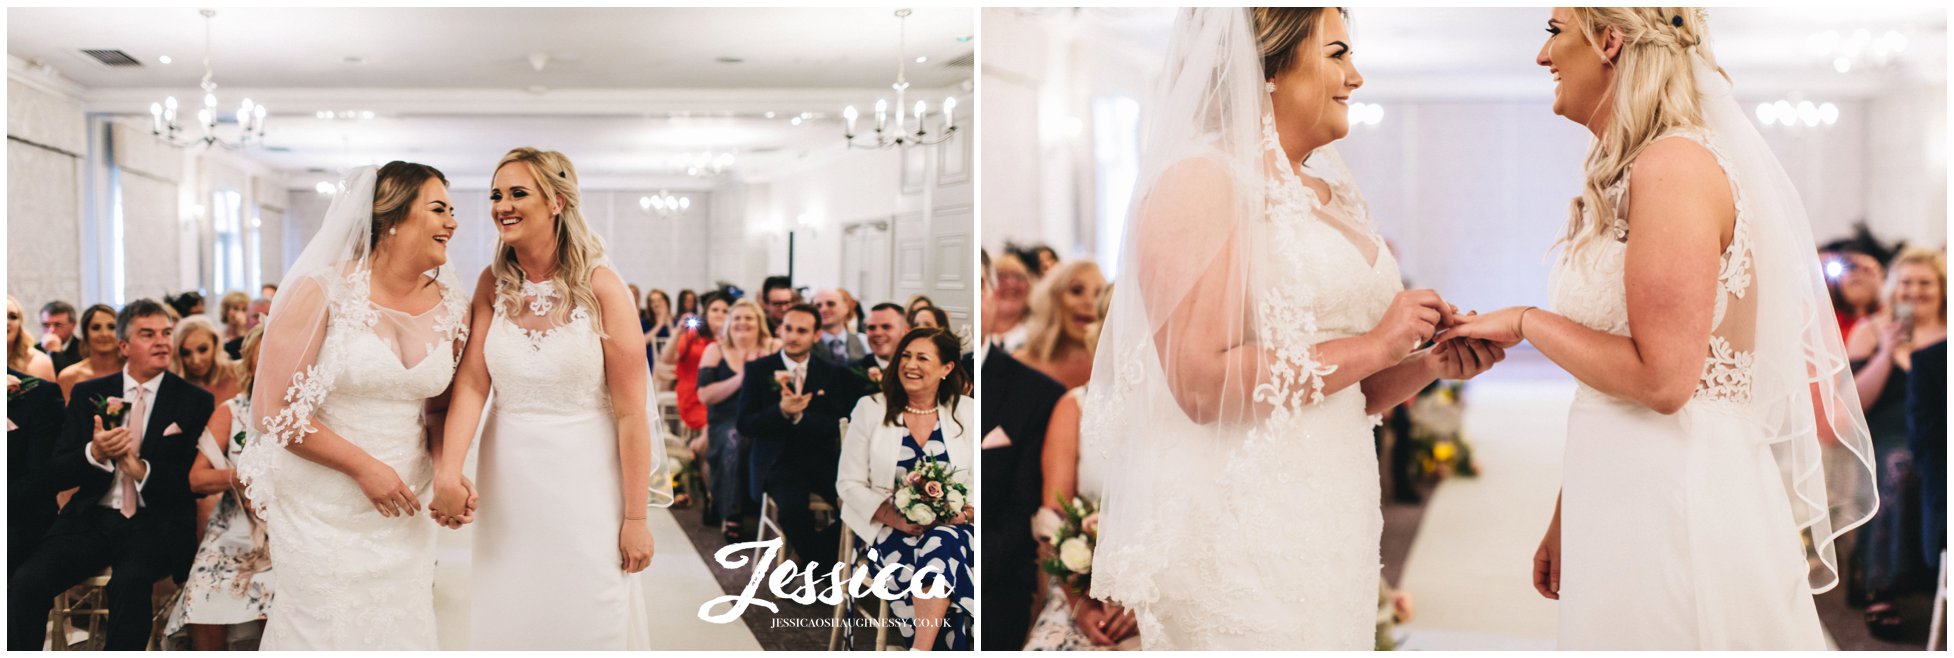 the two brides exchange rings at their mottram hall wedding ceremony